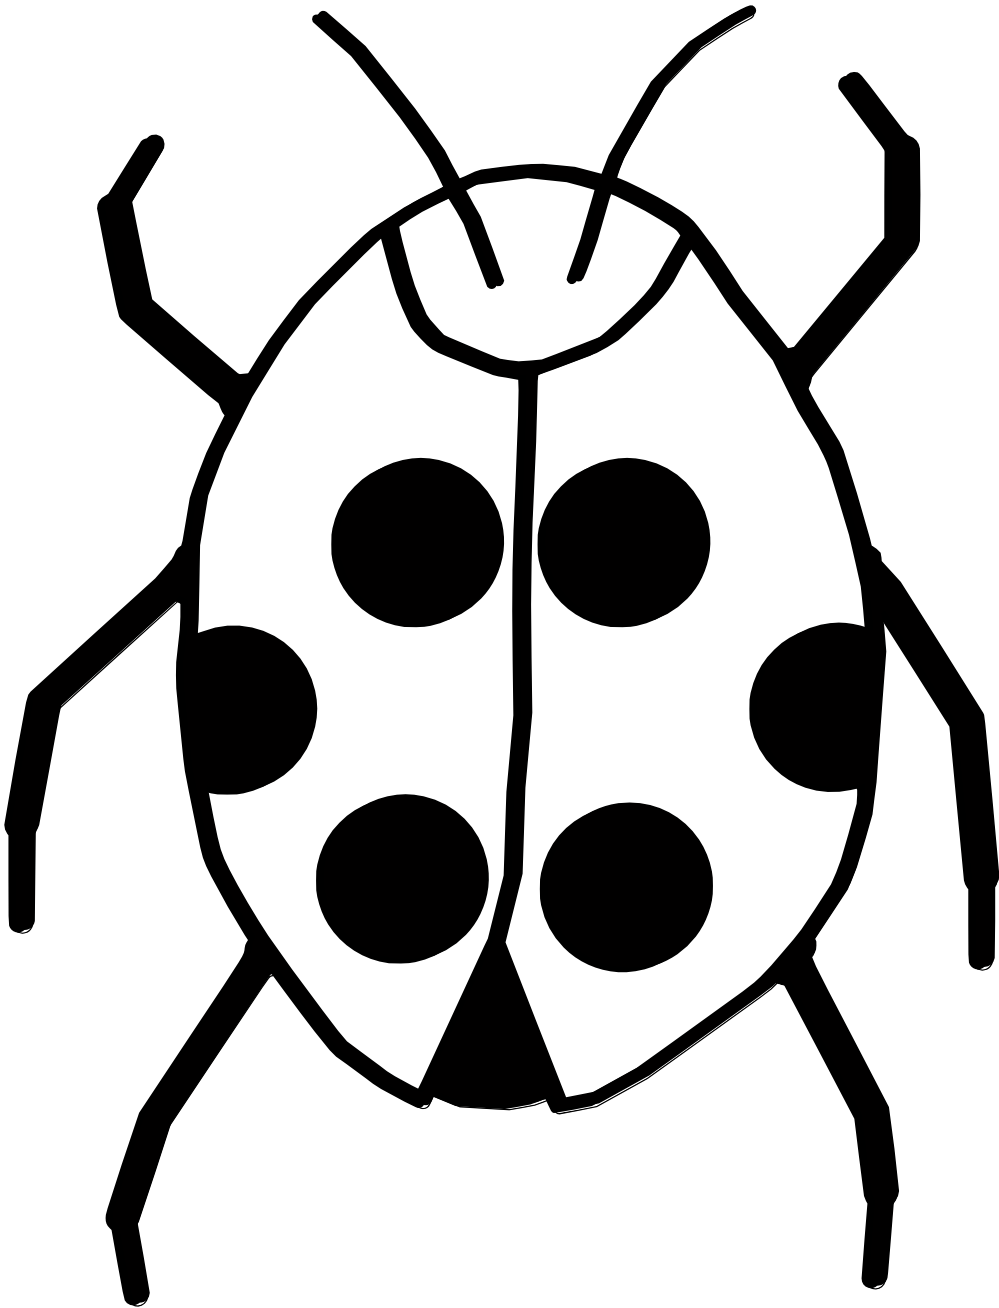 Lady bug clipart black and white